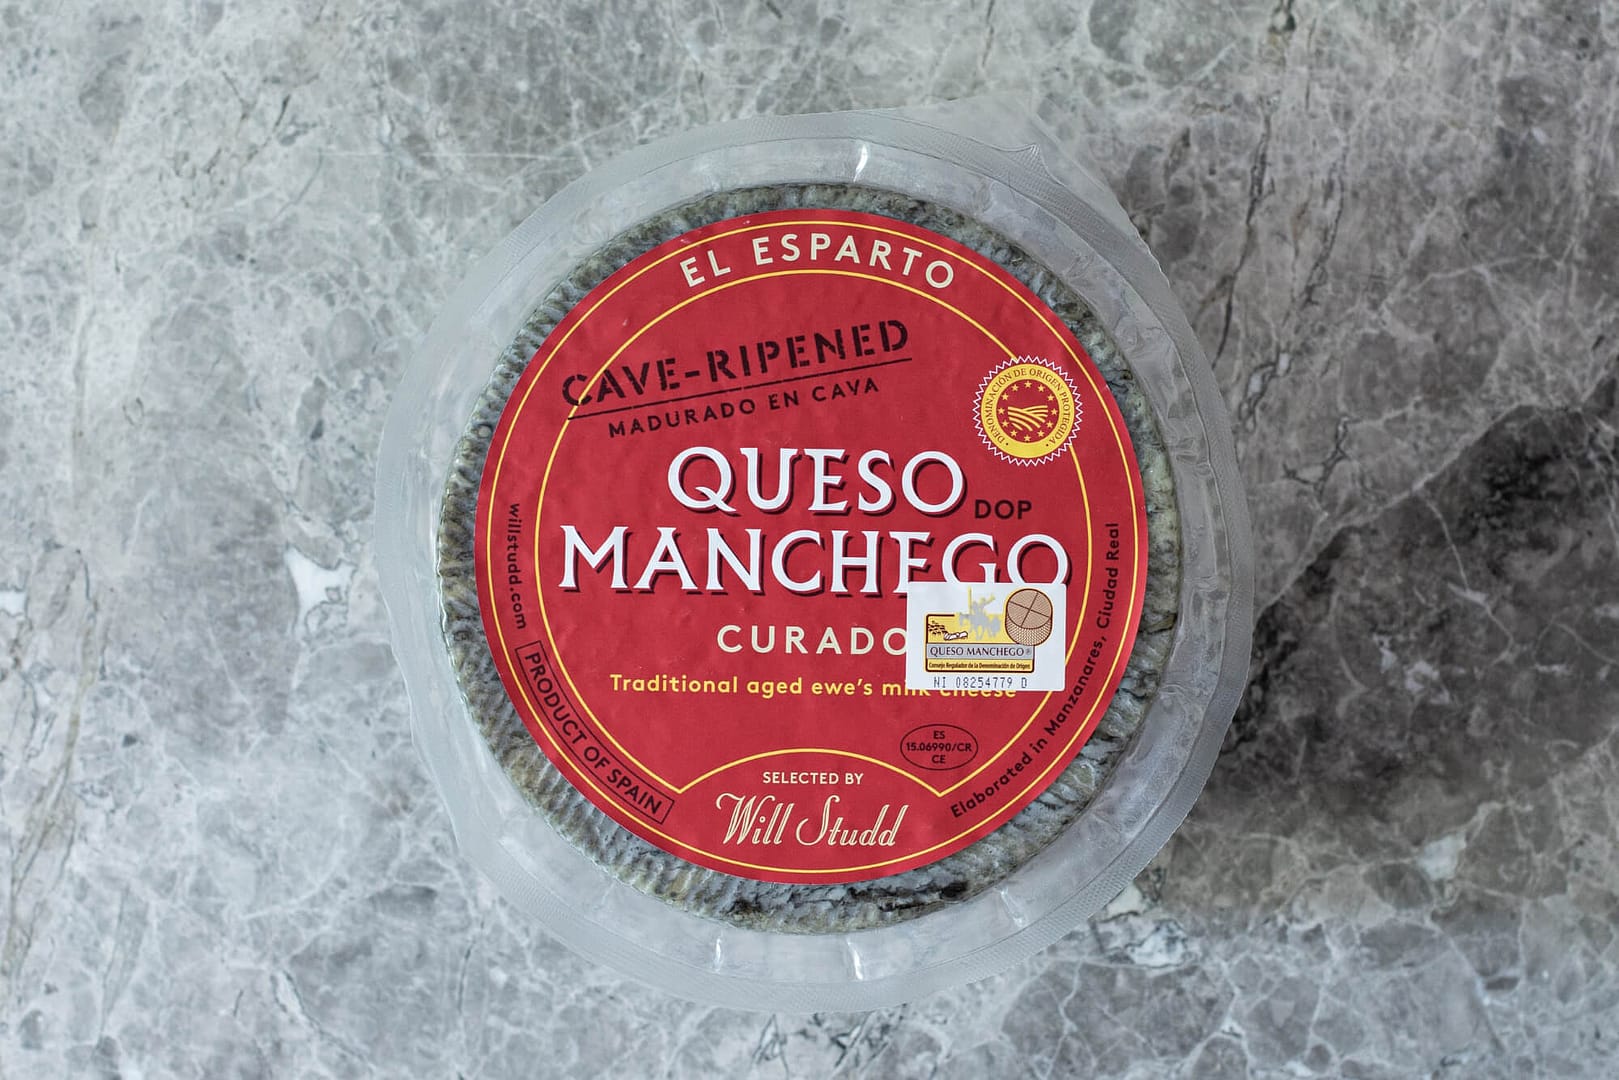 El Esparto Cave Aged Manchego Grey Tile Packaging Featured